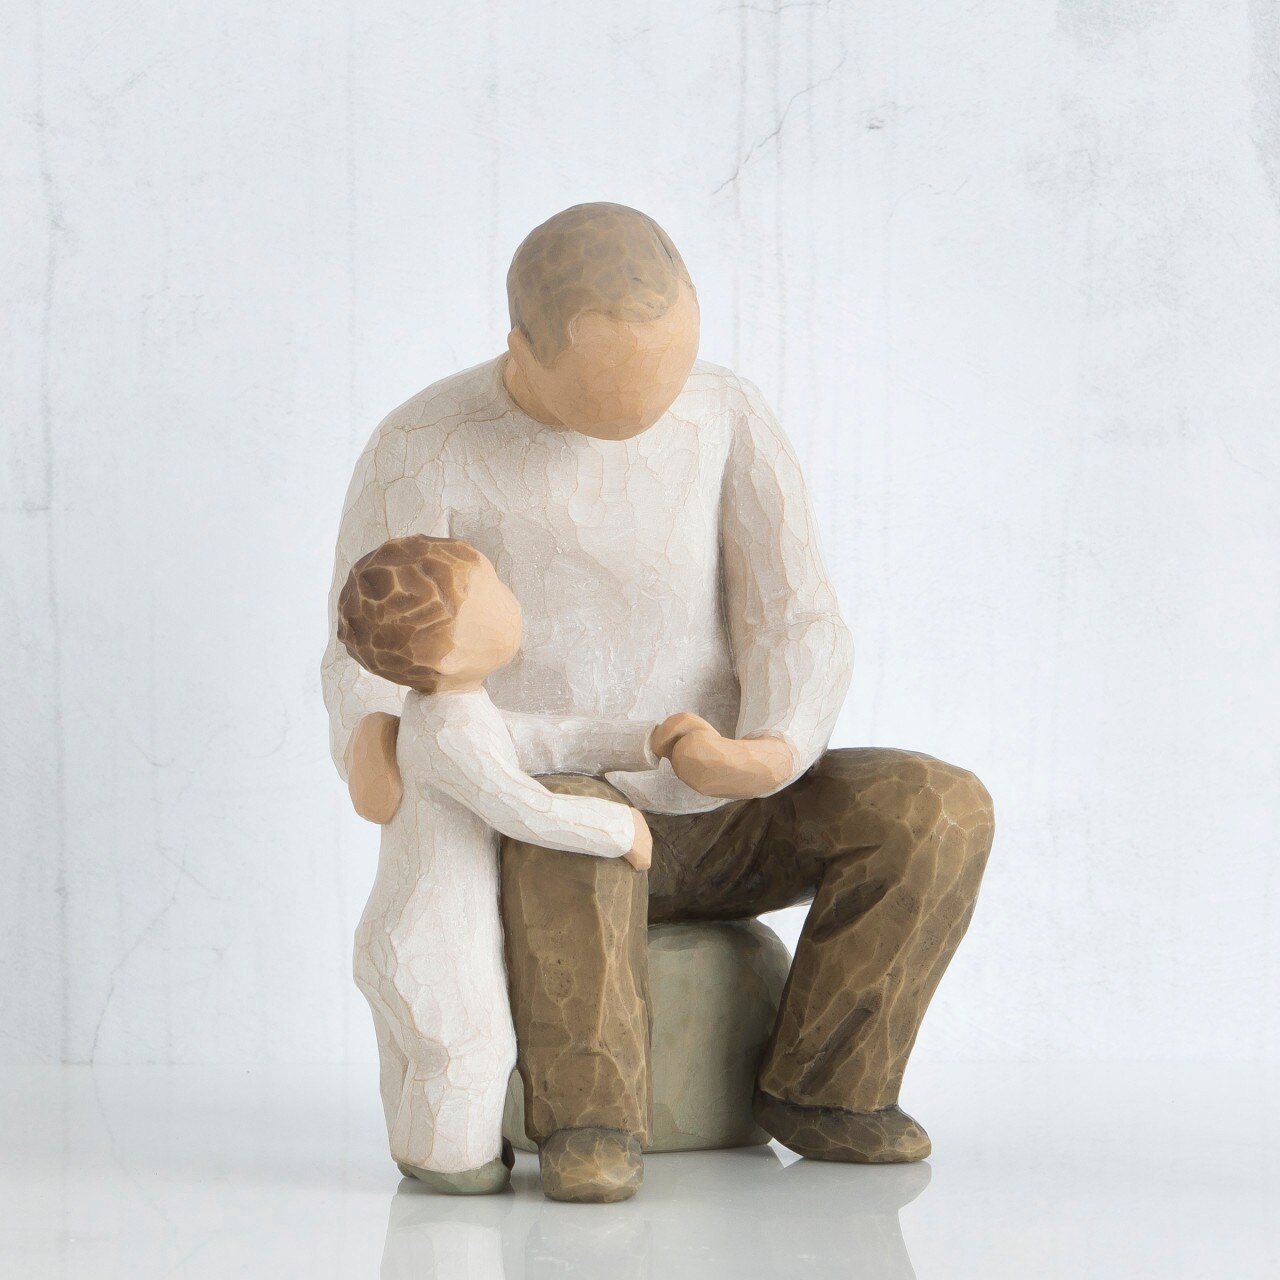 willowtree figurine of a male figure with a small child to represent the bond of a grandfather and grandchild